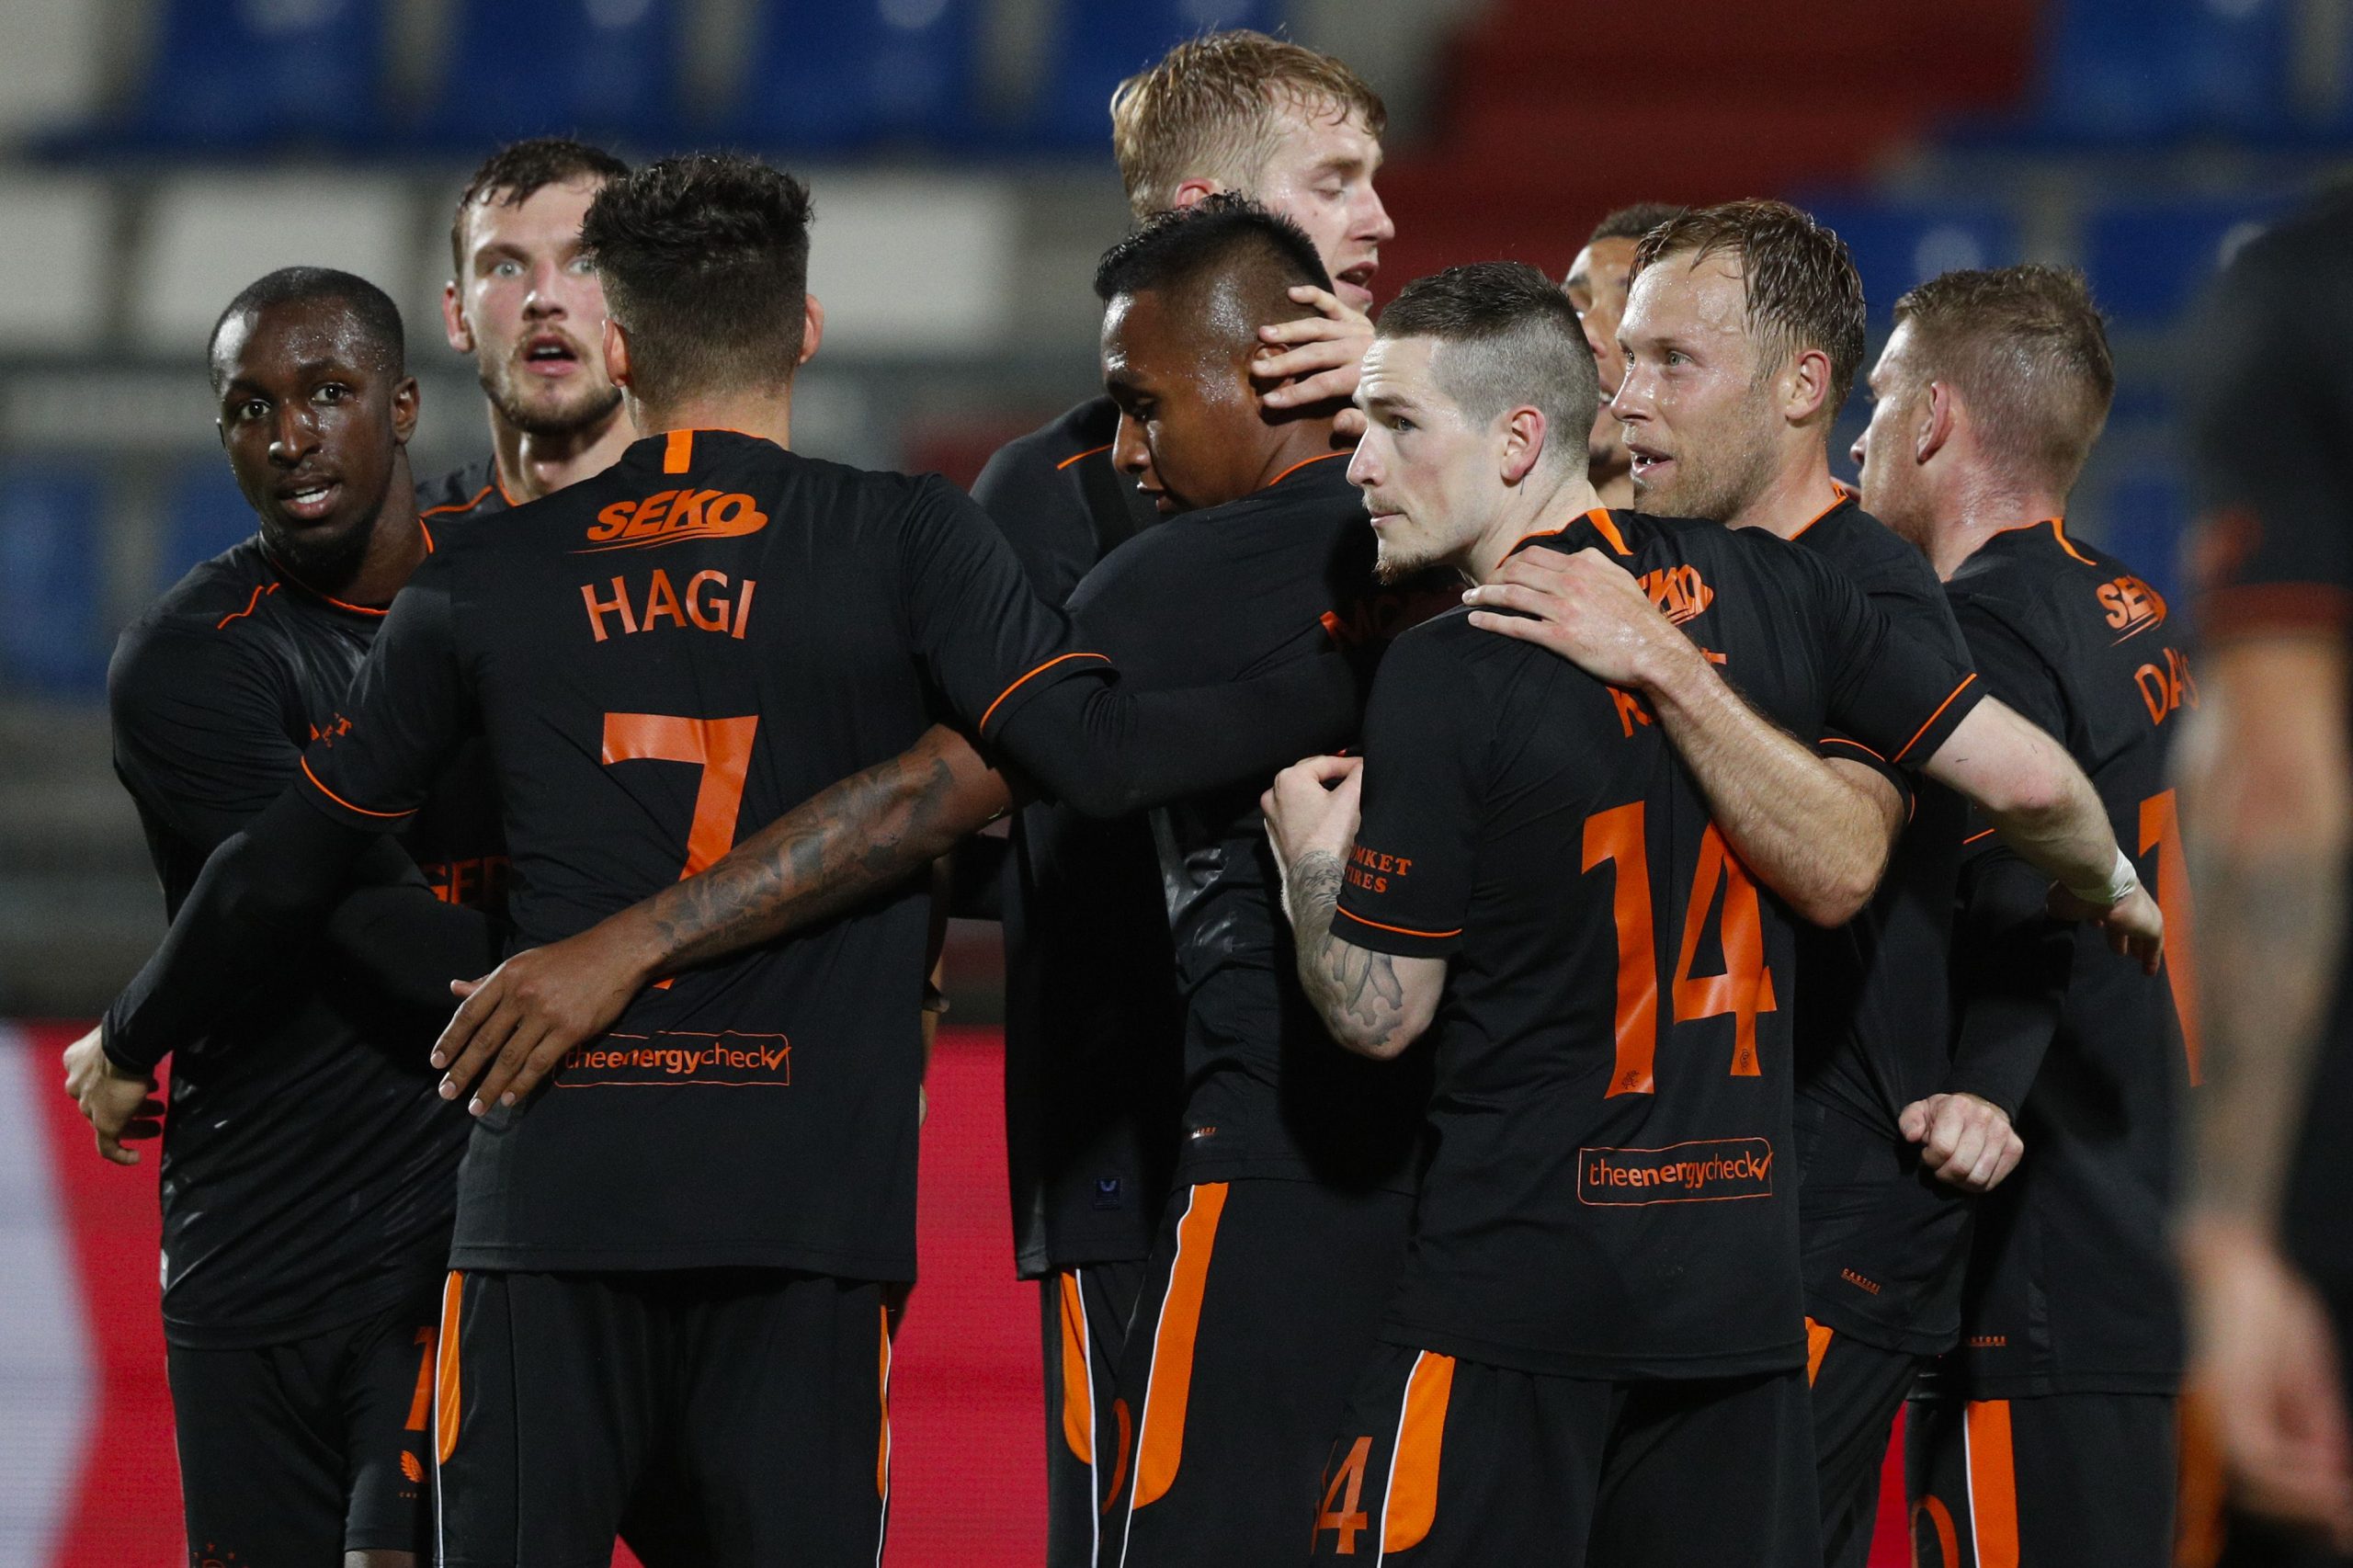 Rangers' players celebrate after the 0-3 goal during the Europa League qualifying round football match between Willem II Tilburg and Rangers FC at the Koning Willem II stadium on September 24, 2020 in Tilburg, Netherlands. (Photo by Jeroen Putmans / ANP / AFP) / Netherlands OUT